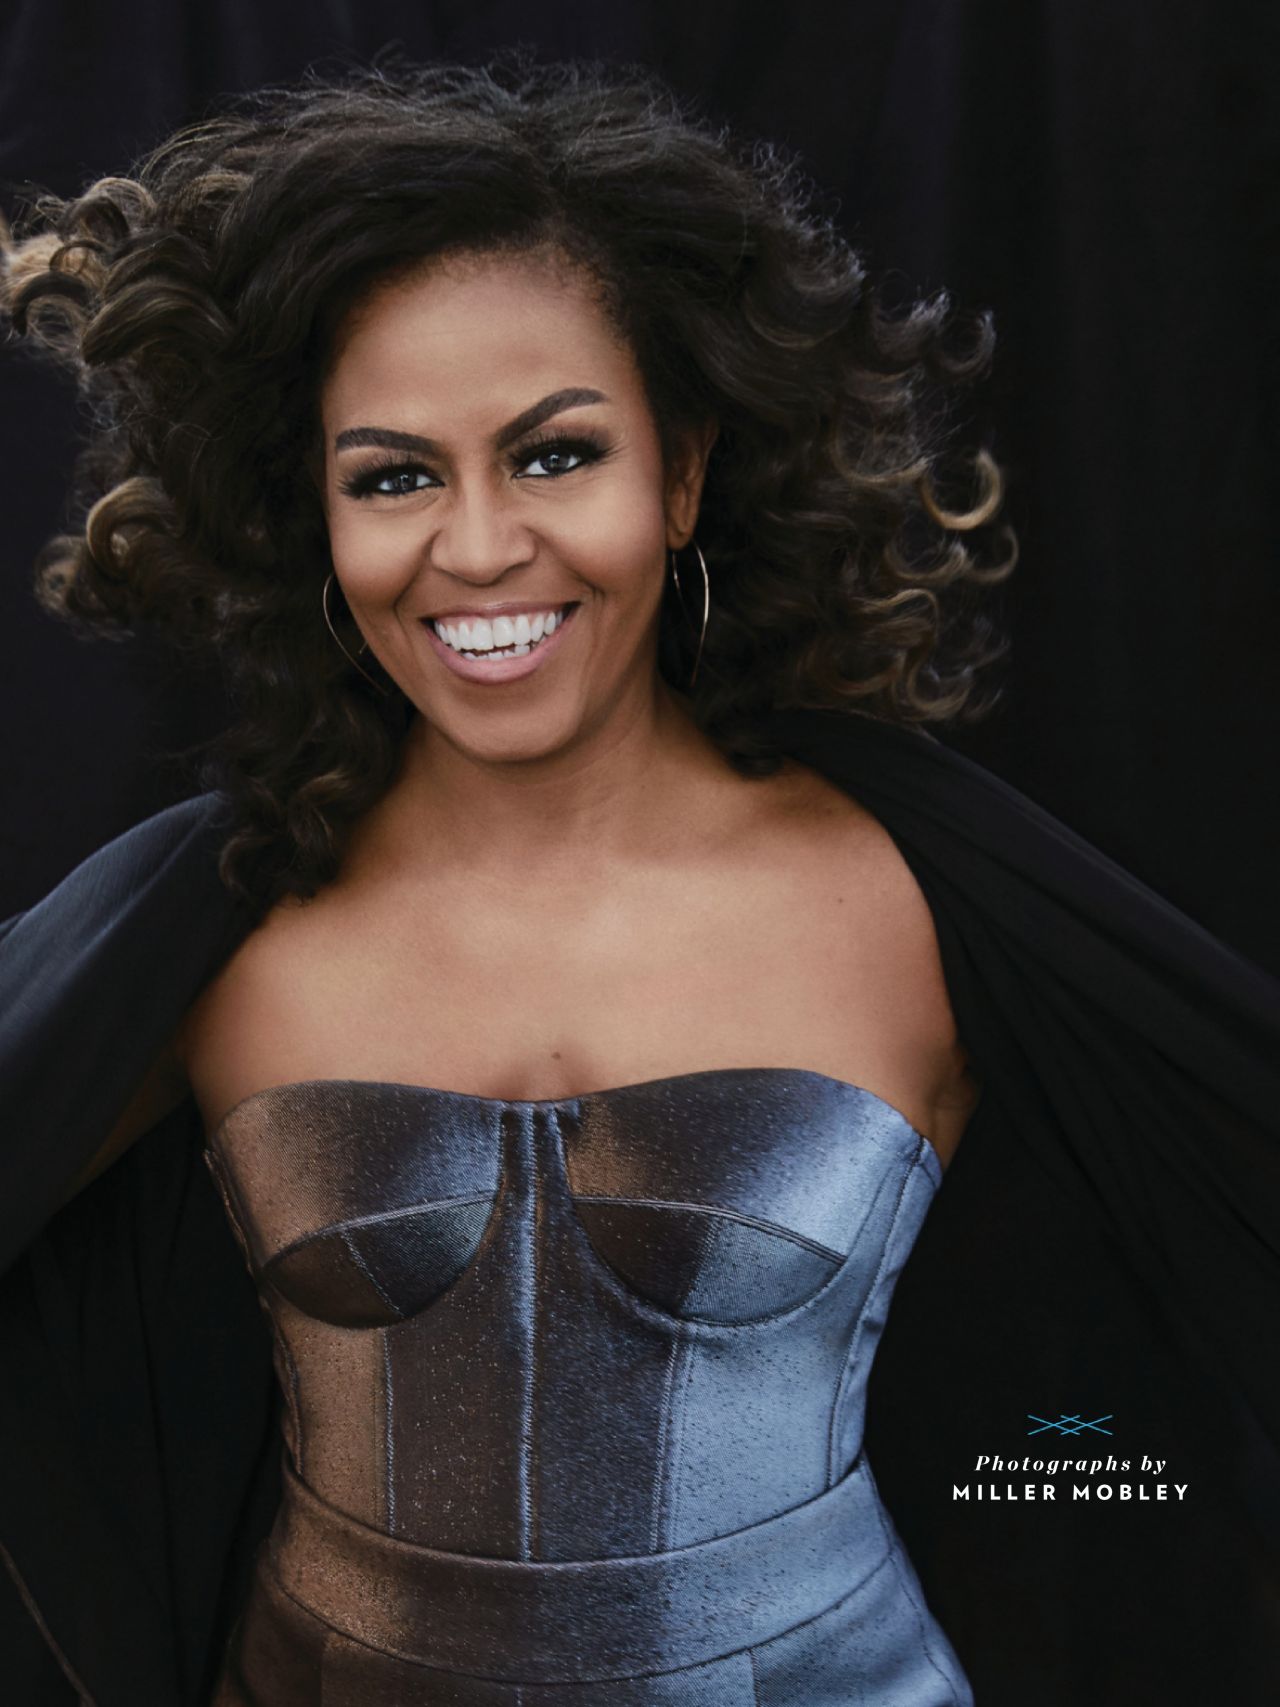 michelle-obama-people-magazine-people-of-the-year-12-06-2019-6